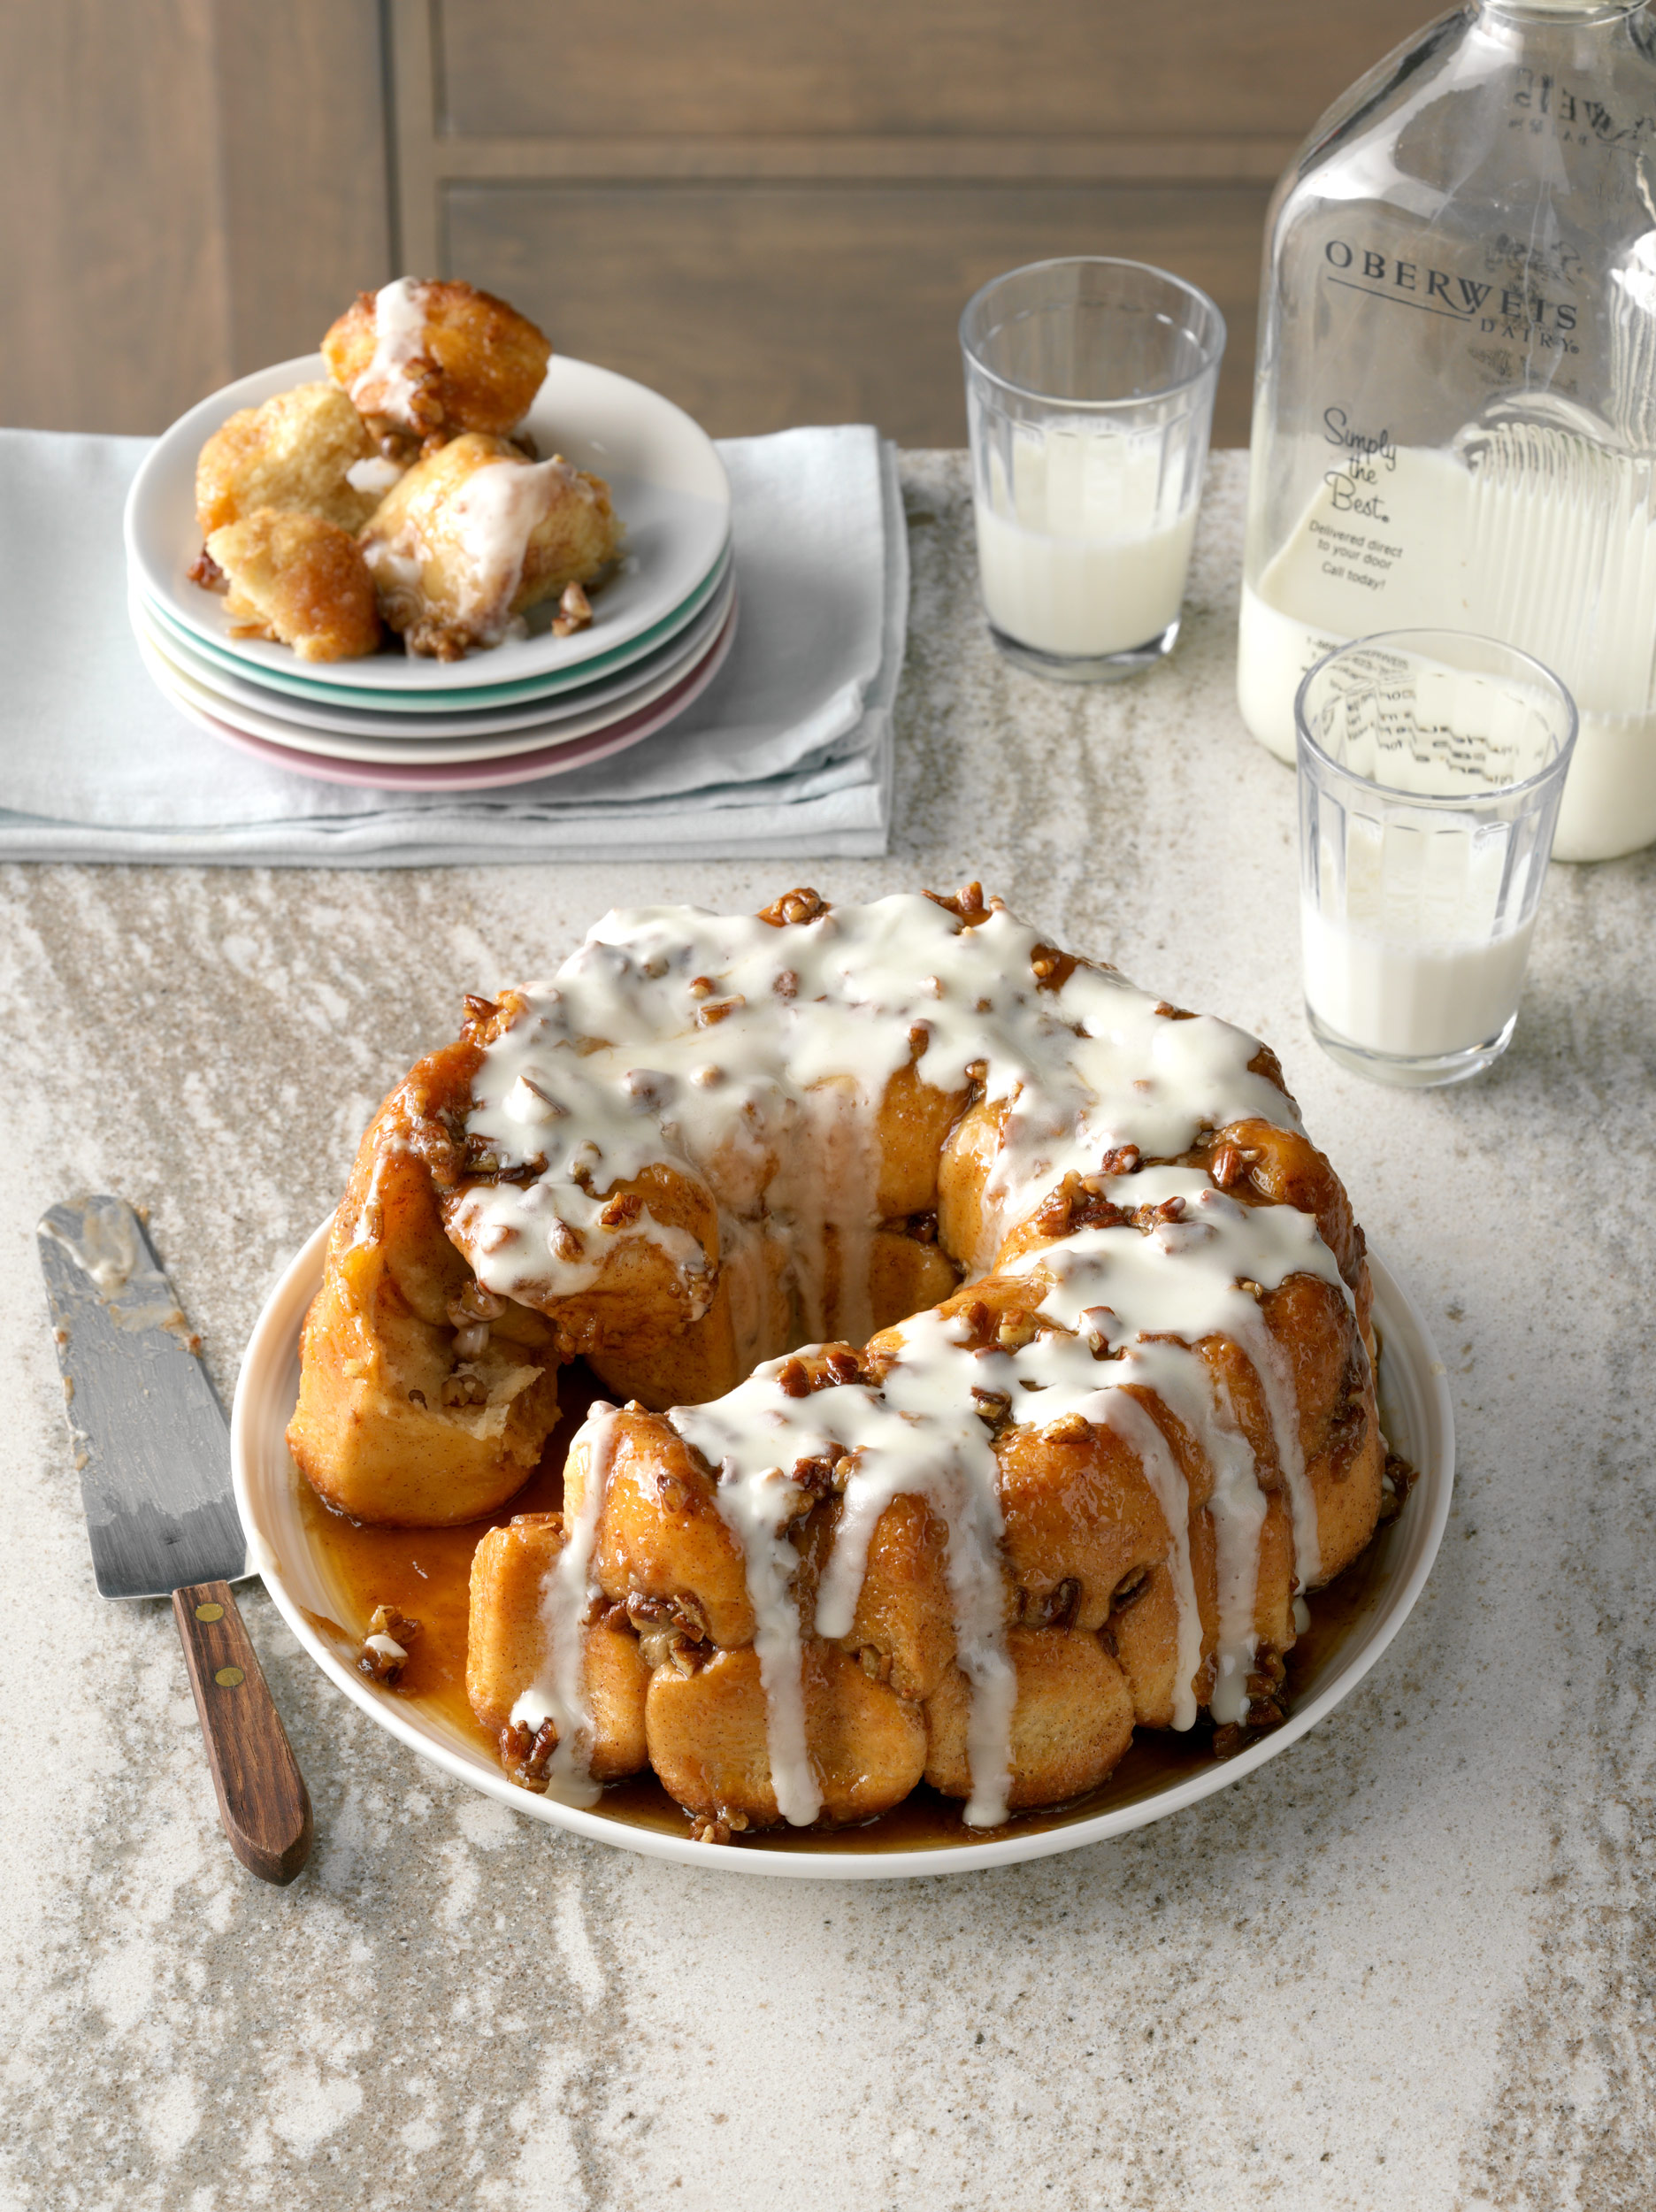 Monkey Bread photo by Chris Kessler Photography.  Chris Kessler is a freelance Photographer based in Milwaukee Wisconsin. Specializing in Food photography and portraiture.